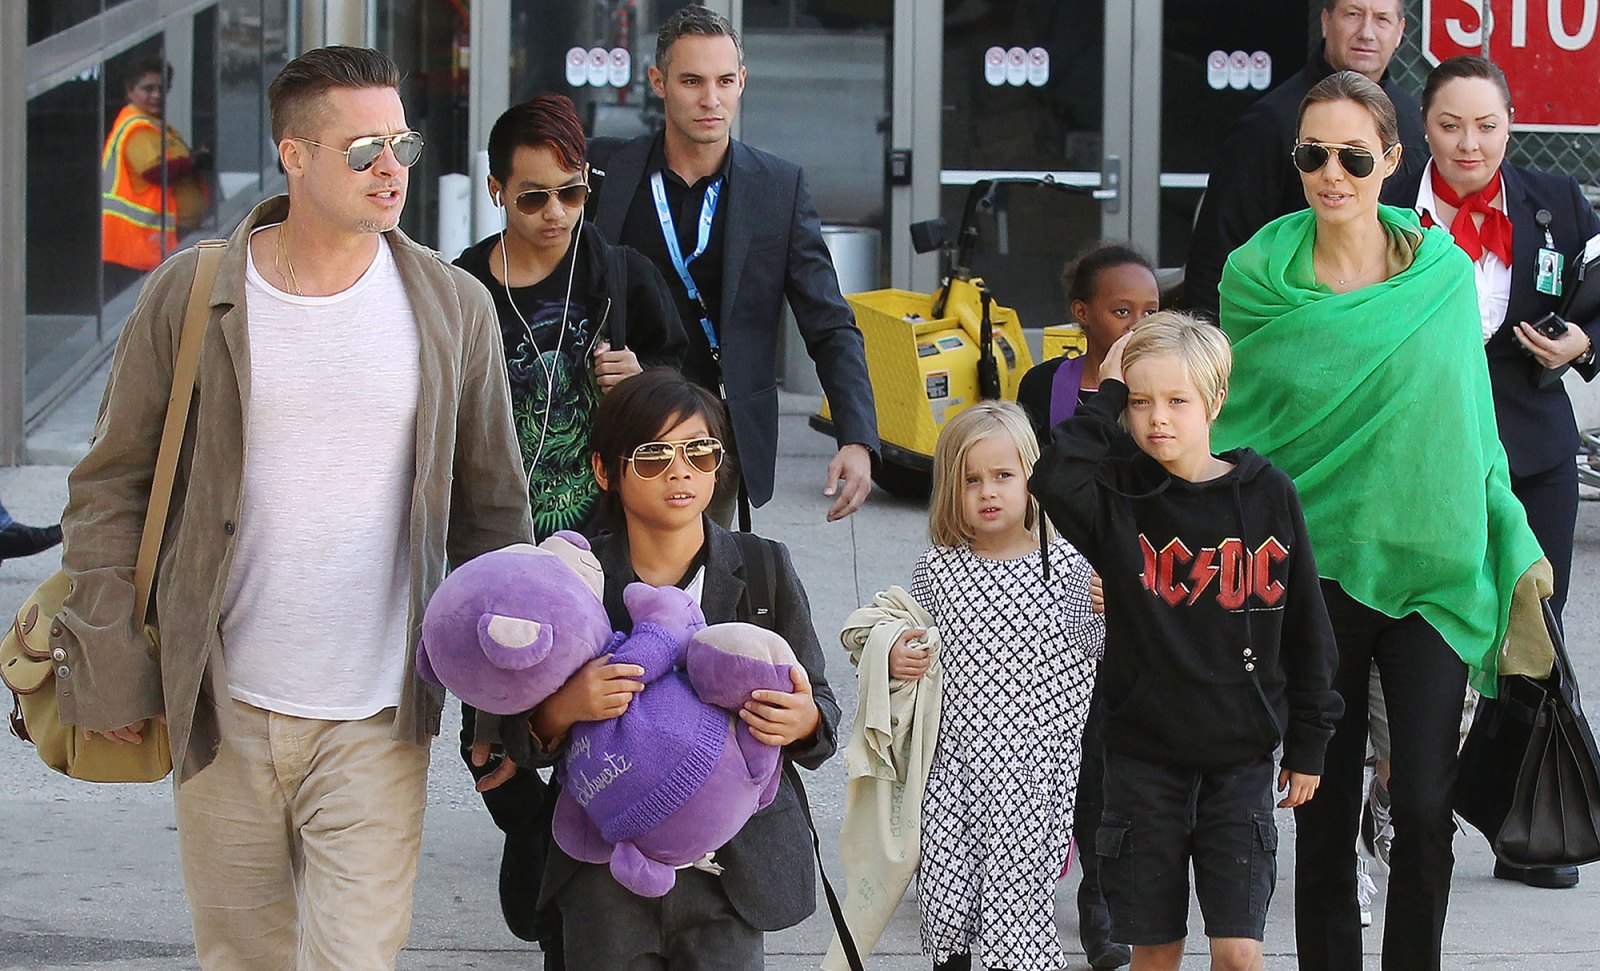 Famous Celeb Dads and Daughters Brad and Shiloh, Vivienne and Zahara Jolie-Pitt